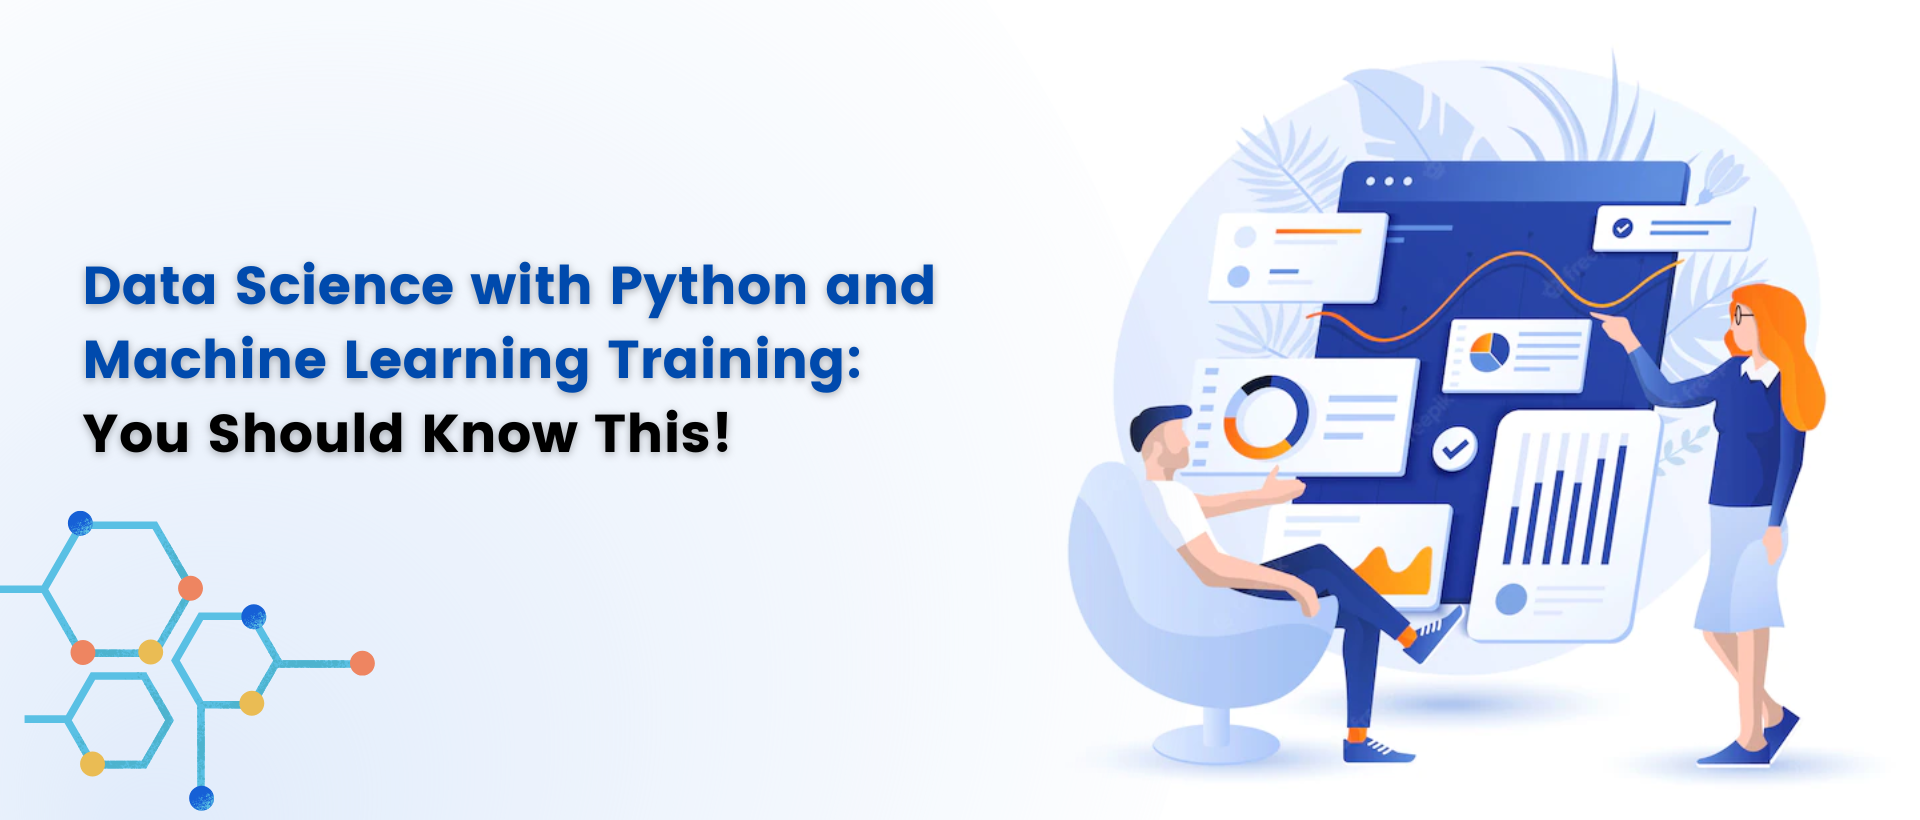 Data Science with Python and Machine Learning Training: You Should Know This!